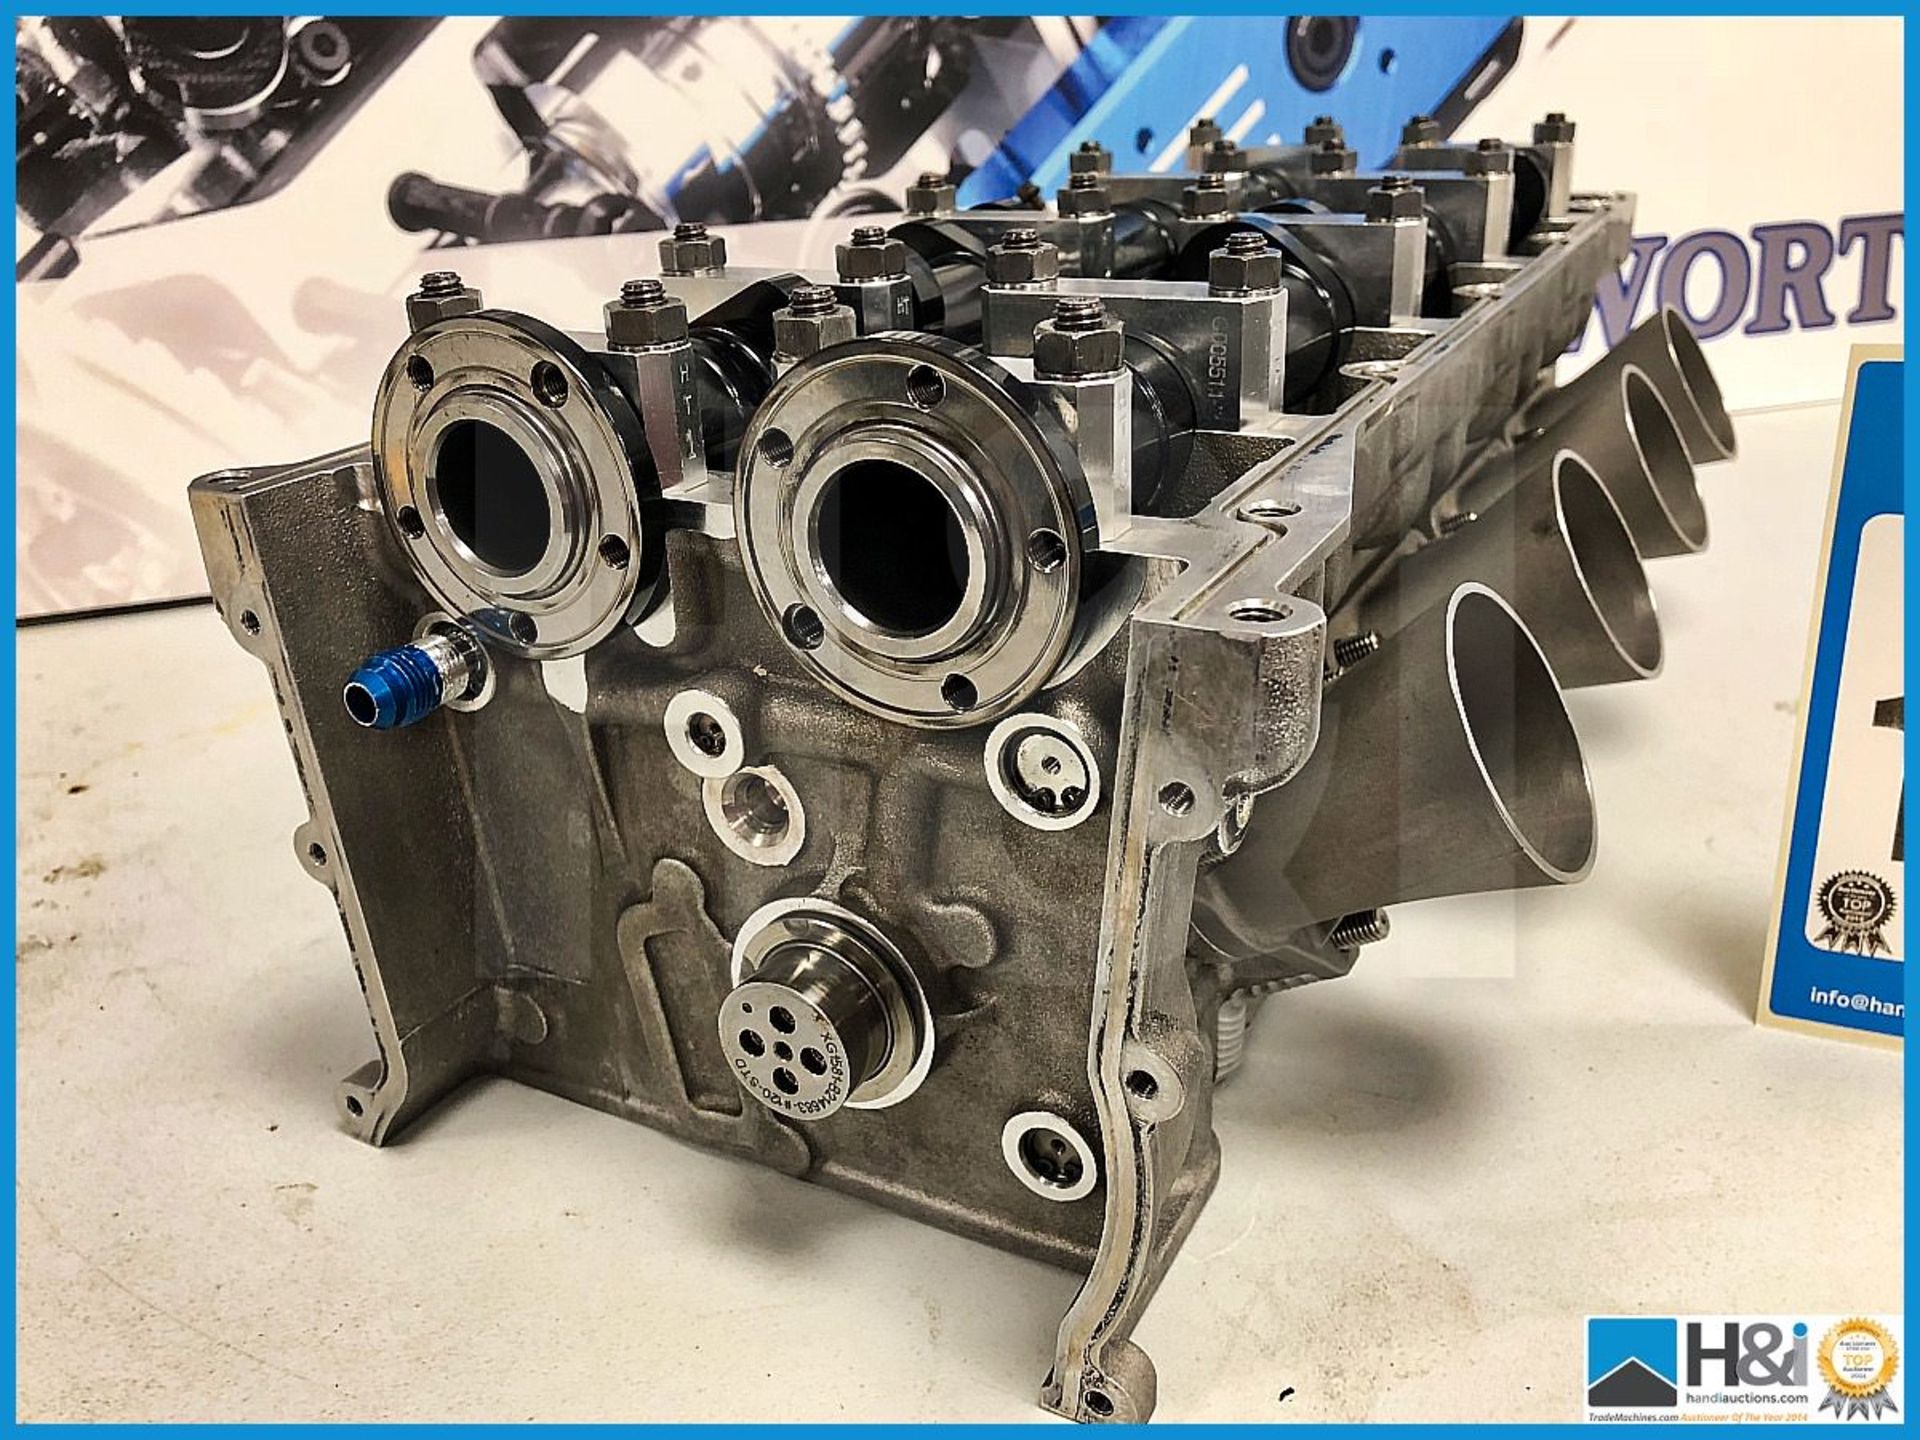 1 x Cosworth XG Indycar LH cylinder head with cams and valves. Appears used - Image 2 of 6